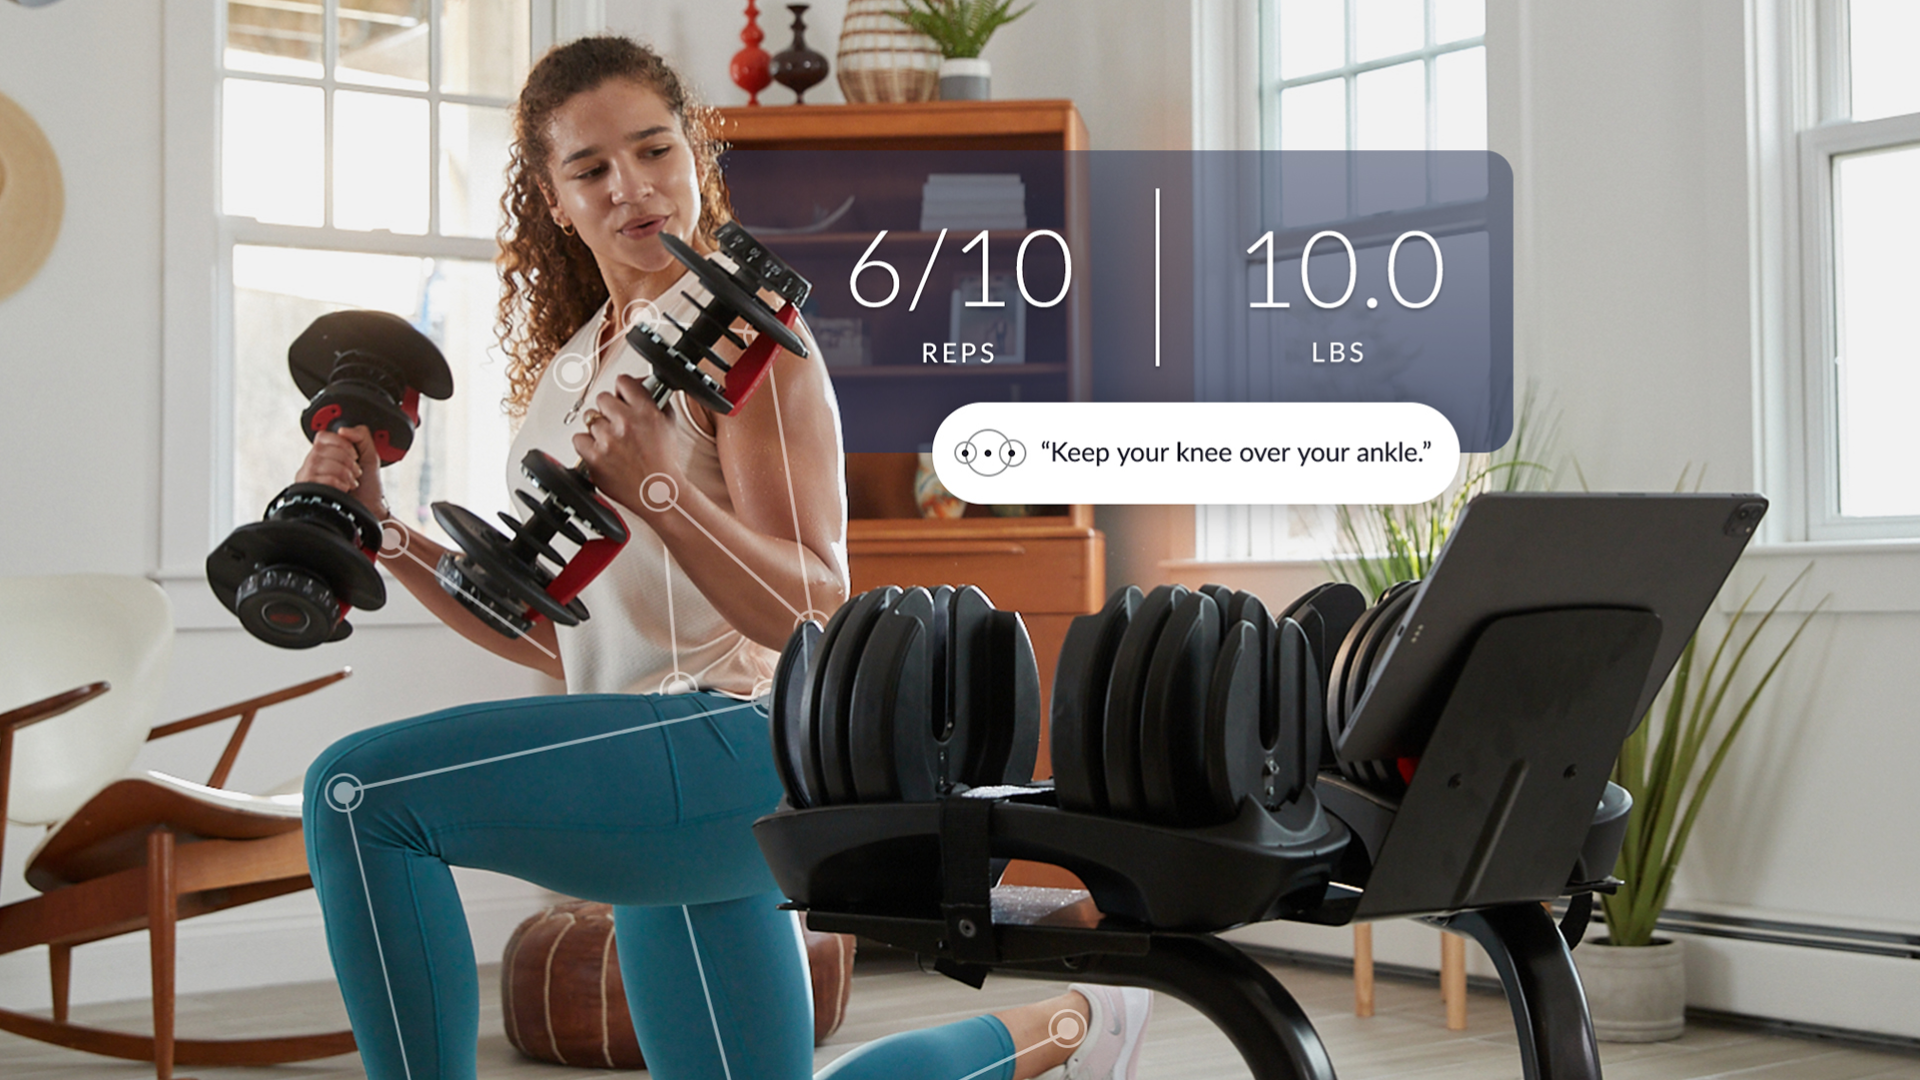 A woman holding Bowflex weights with an overlay of stats being counted by the Nautilus a JRNY app designed by Supply. The picture includes some text of the app telling the woman to "Keep your knee over your ankle"